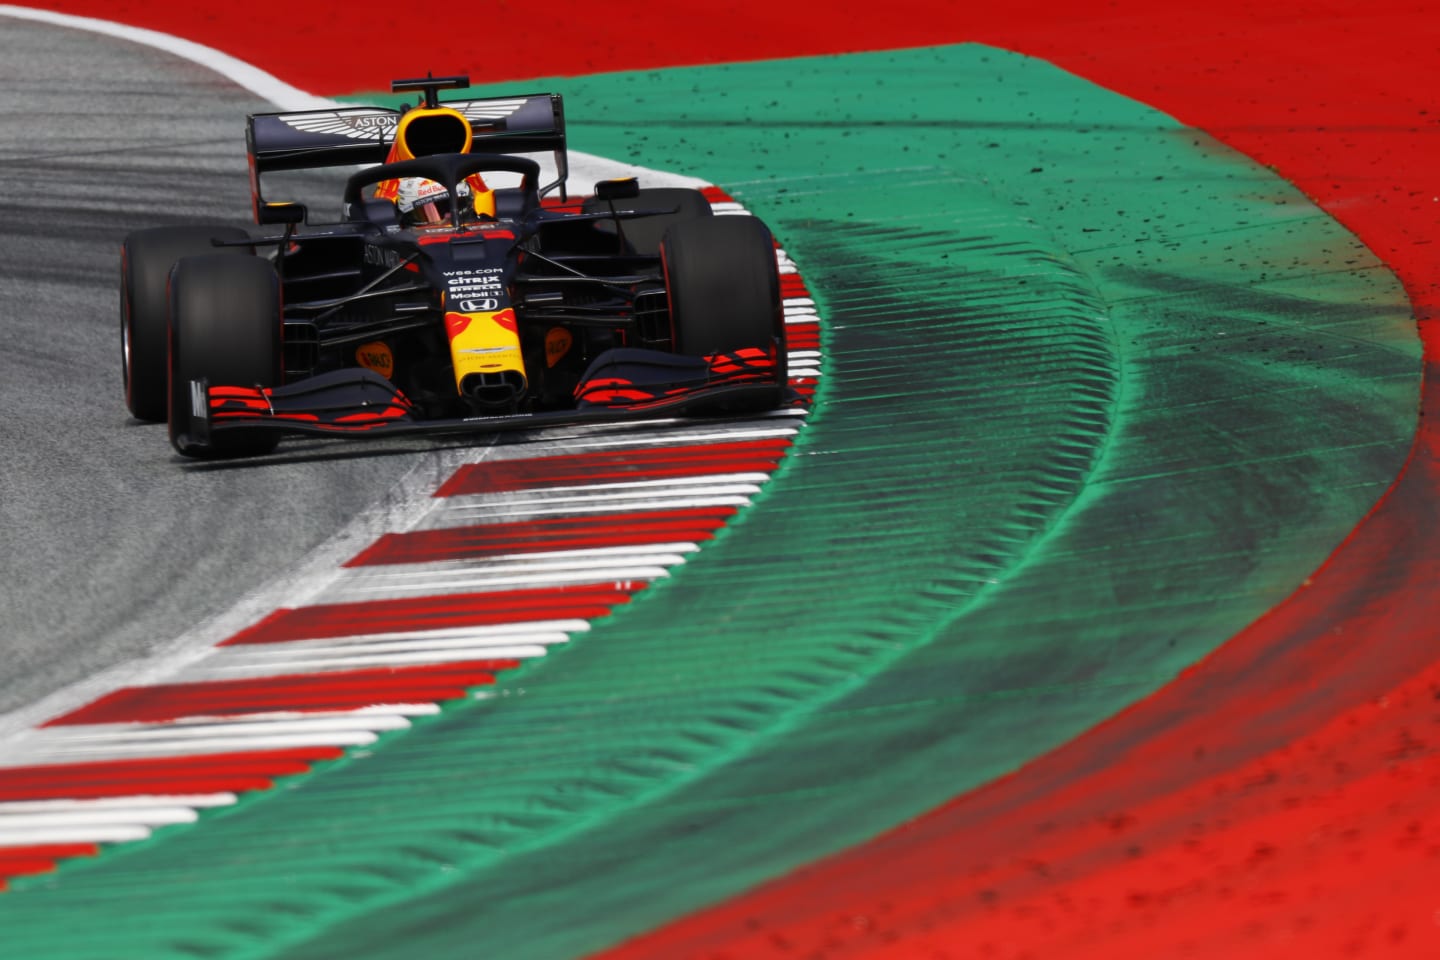 SPIELBERG, AUSTRIA - JULY 04: Max Verstappen of the Netherlands driving the (33) Aston Martin Red Bull Racing RB16 on track during qualifying for the Formula One Grand Prix of Austria at Red Bull Ring on July 04, 2020 in Spielberg, Austria. (Photo by Leonhard Foeger/Pool via Getty Images)